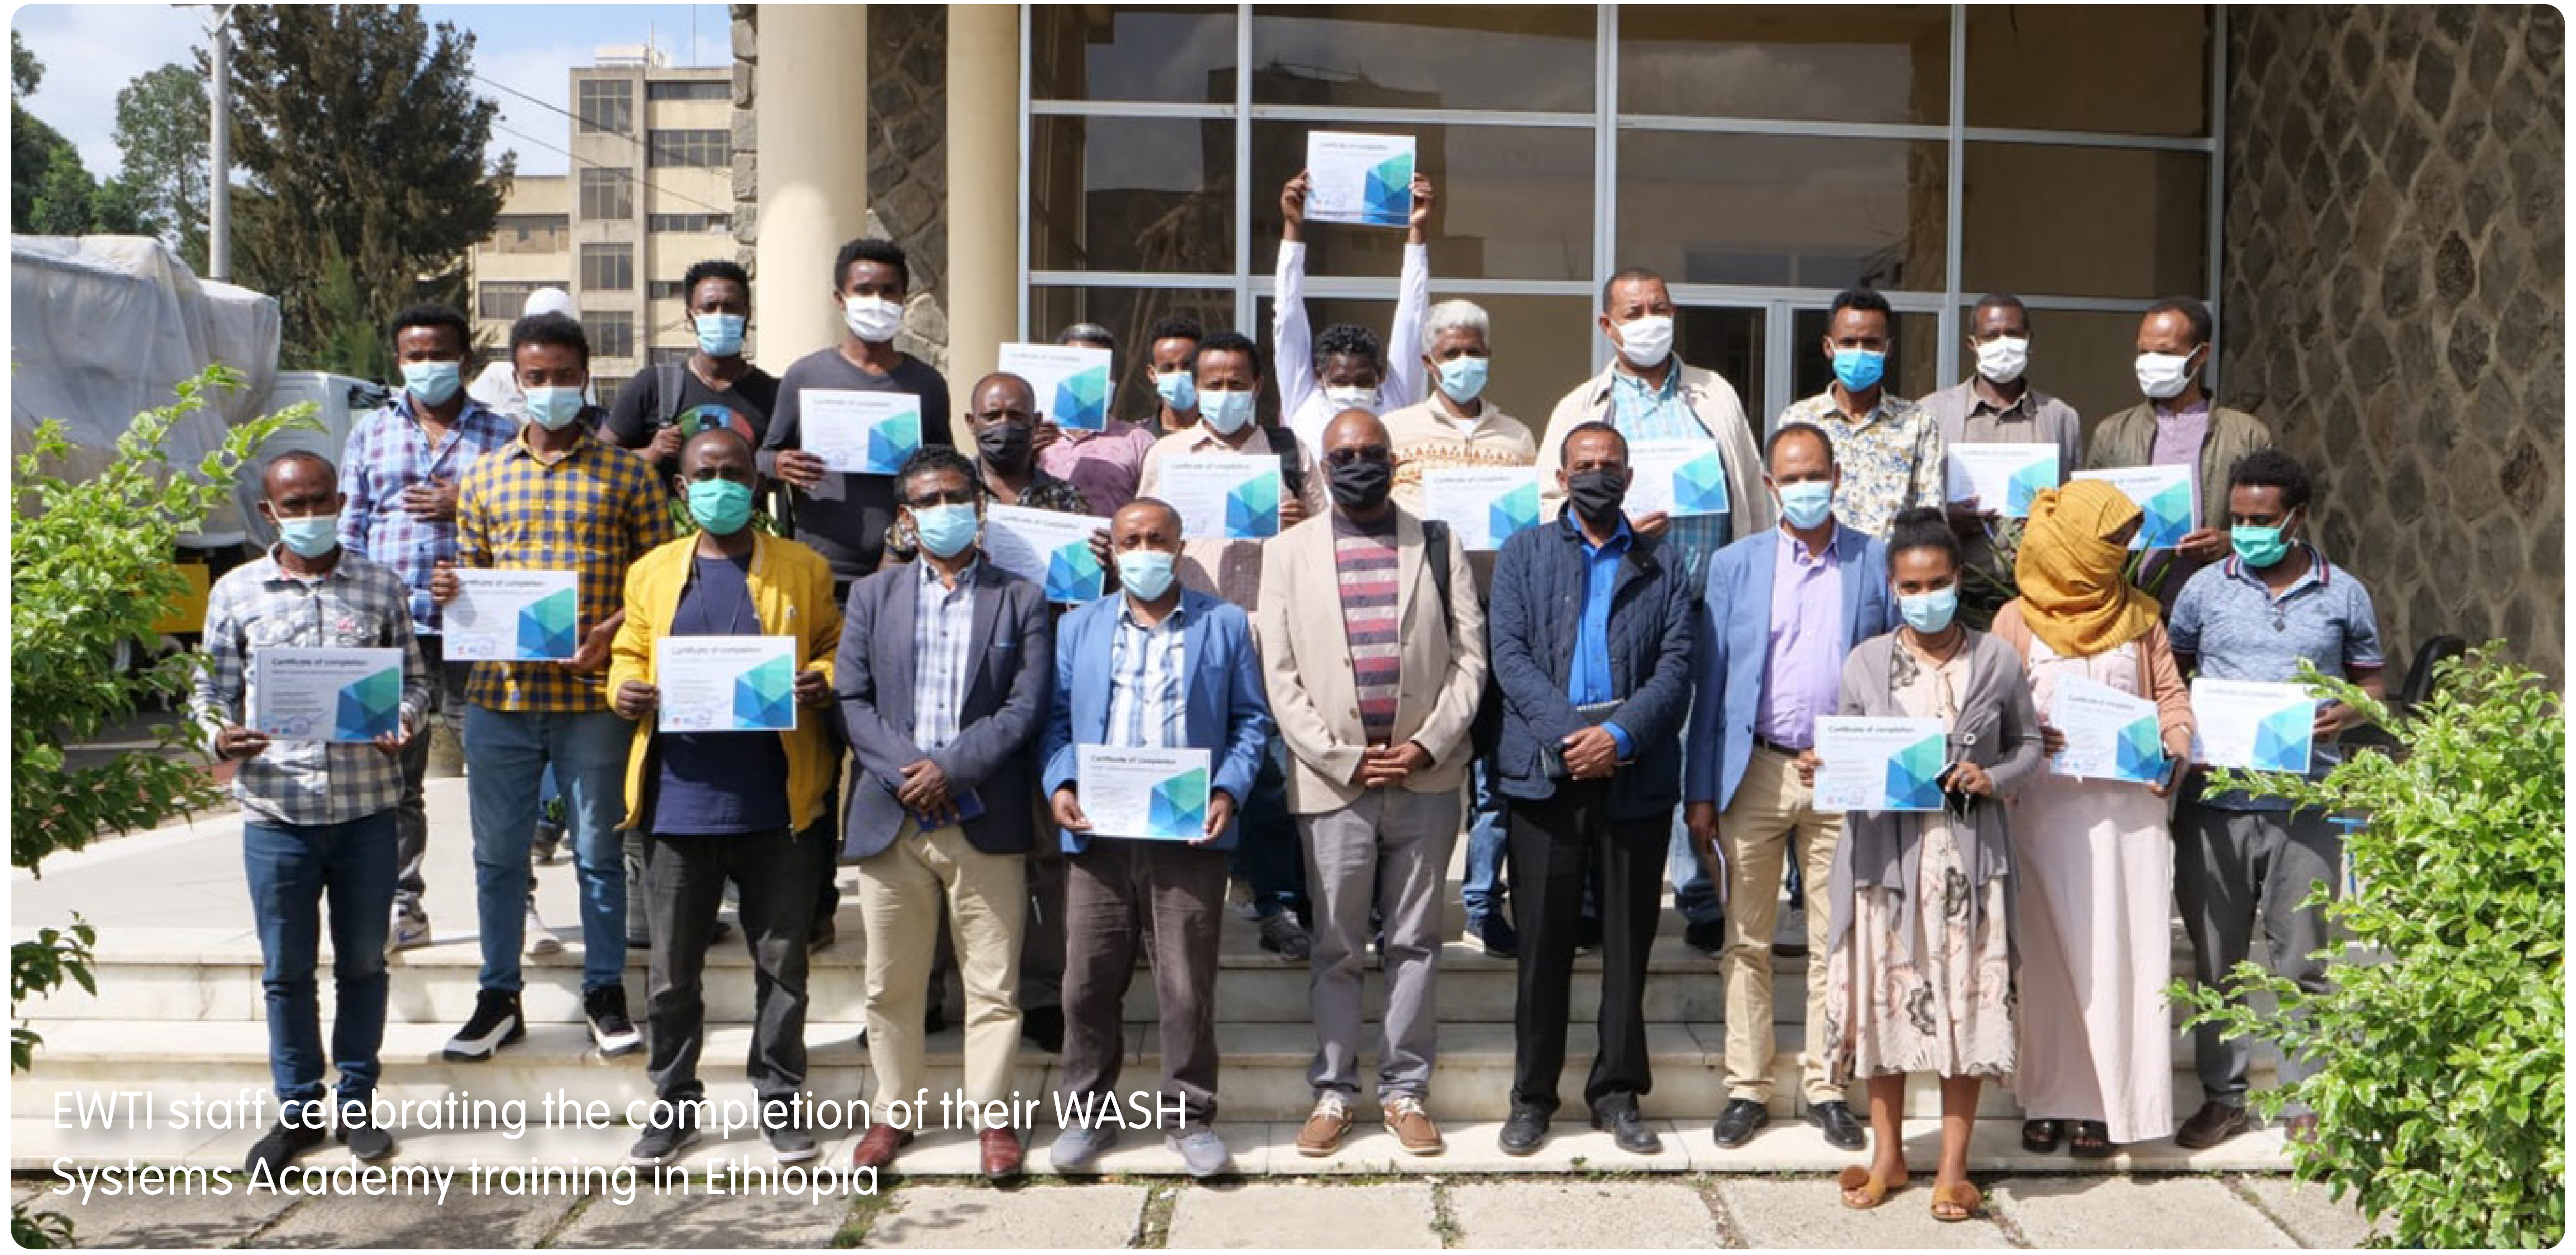 EWTI staff celebrating the completion of their WASH Systems Academy training in Ethiopia